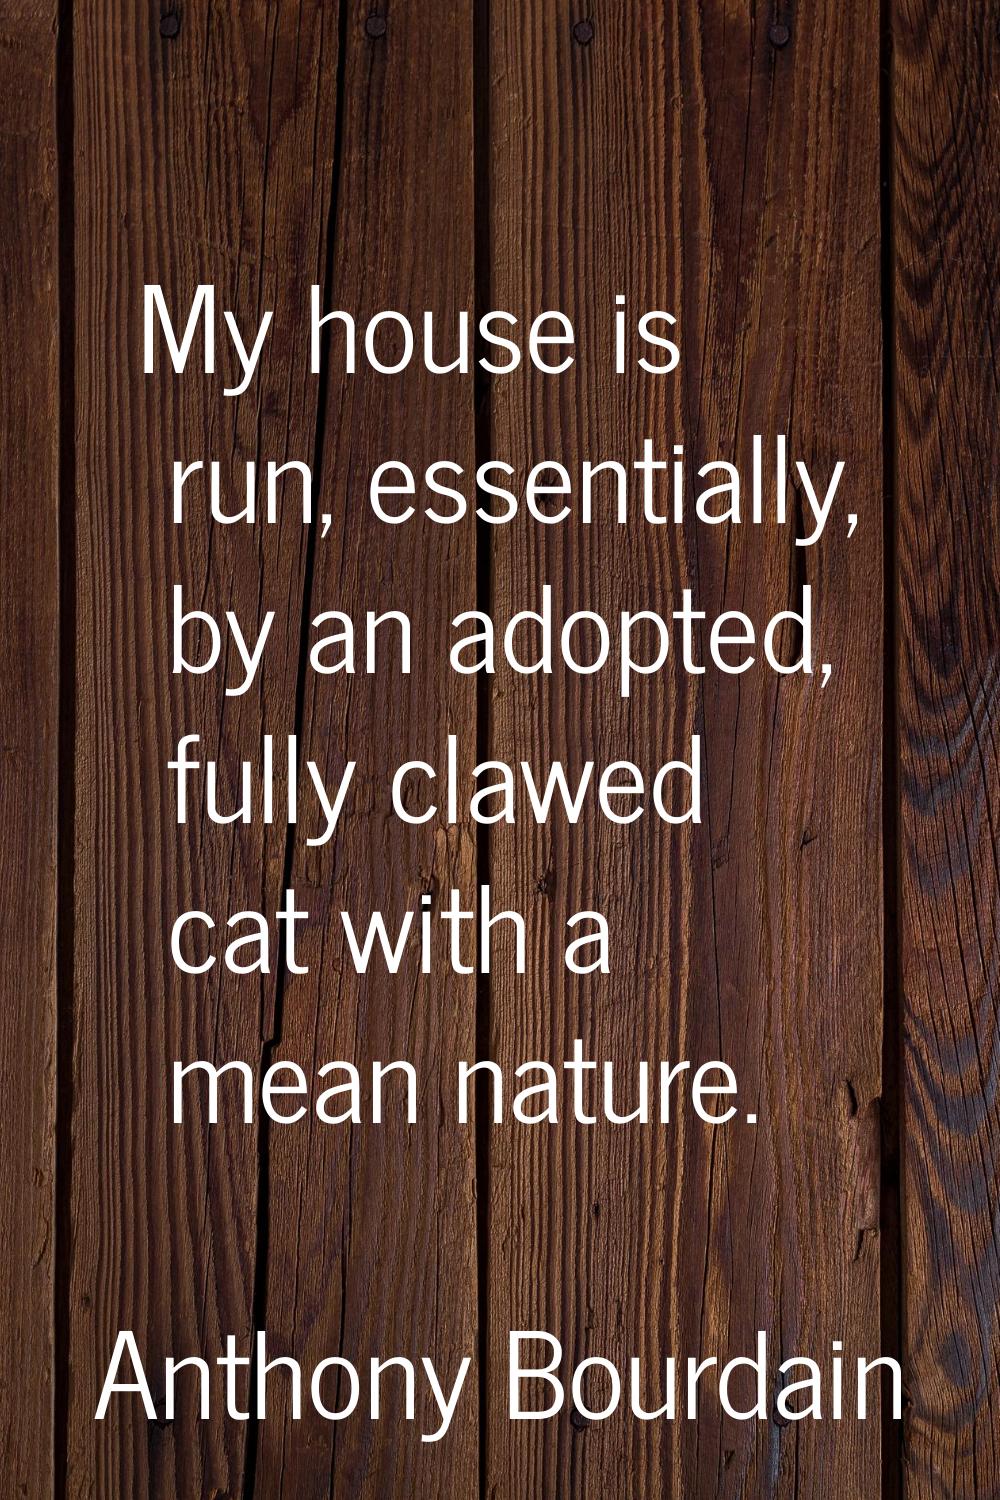 My house is run, essentially, by an adopted, fully clawed cat with a mean nature.